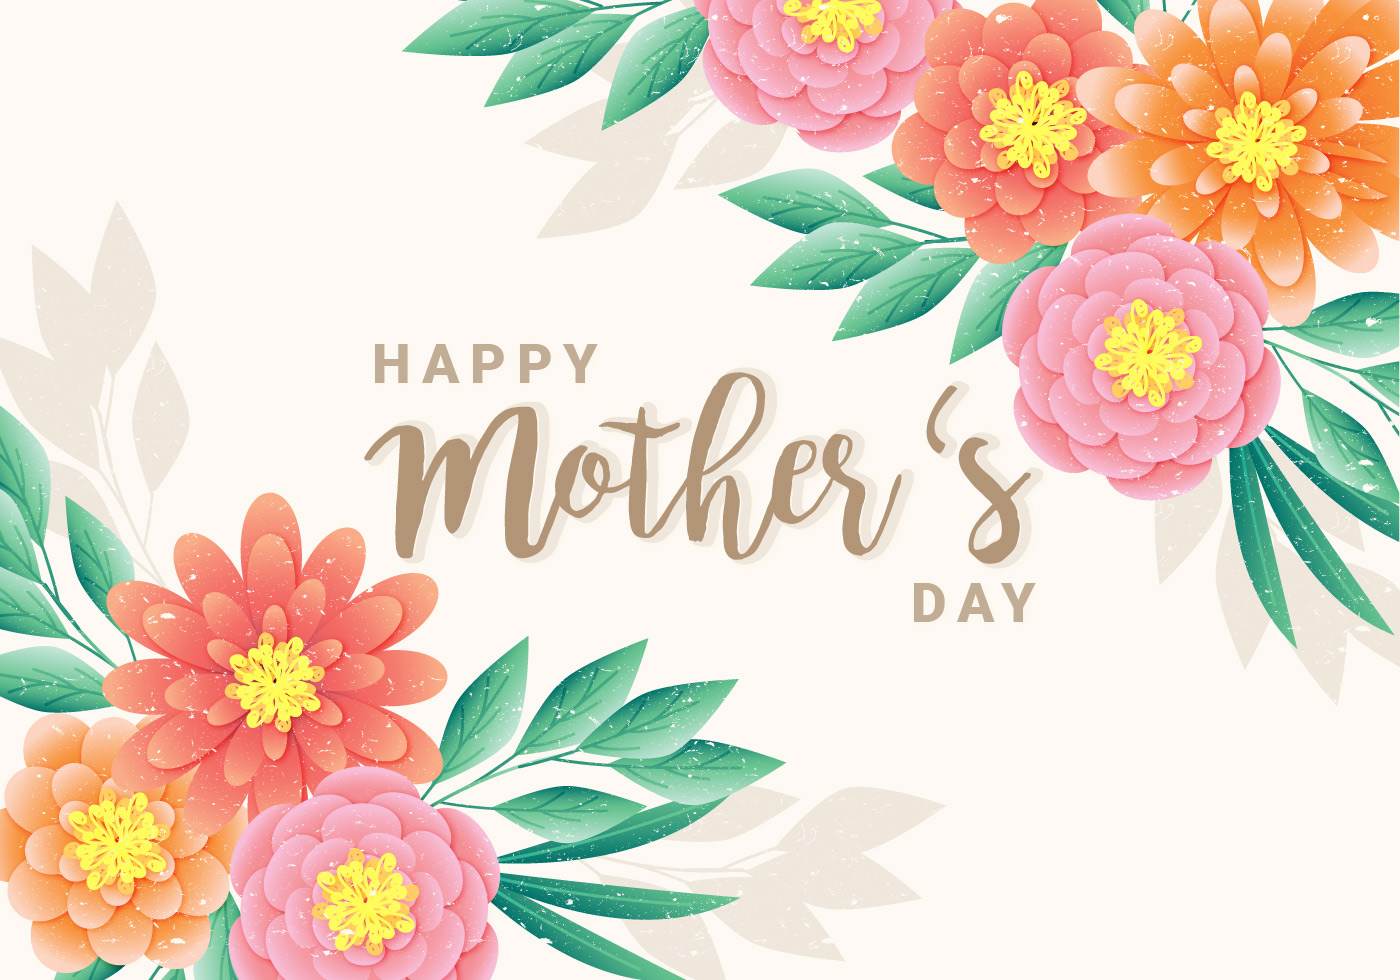 Download Vector Happy Mother's Day Background - Download Free ...